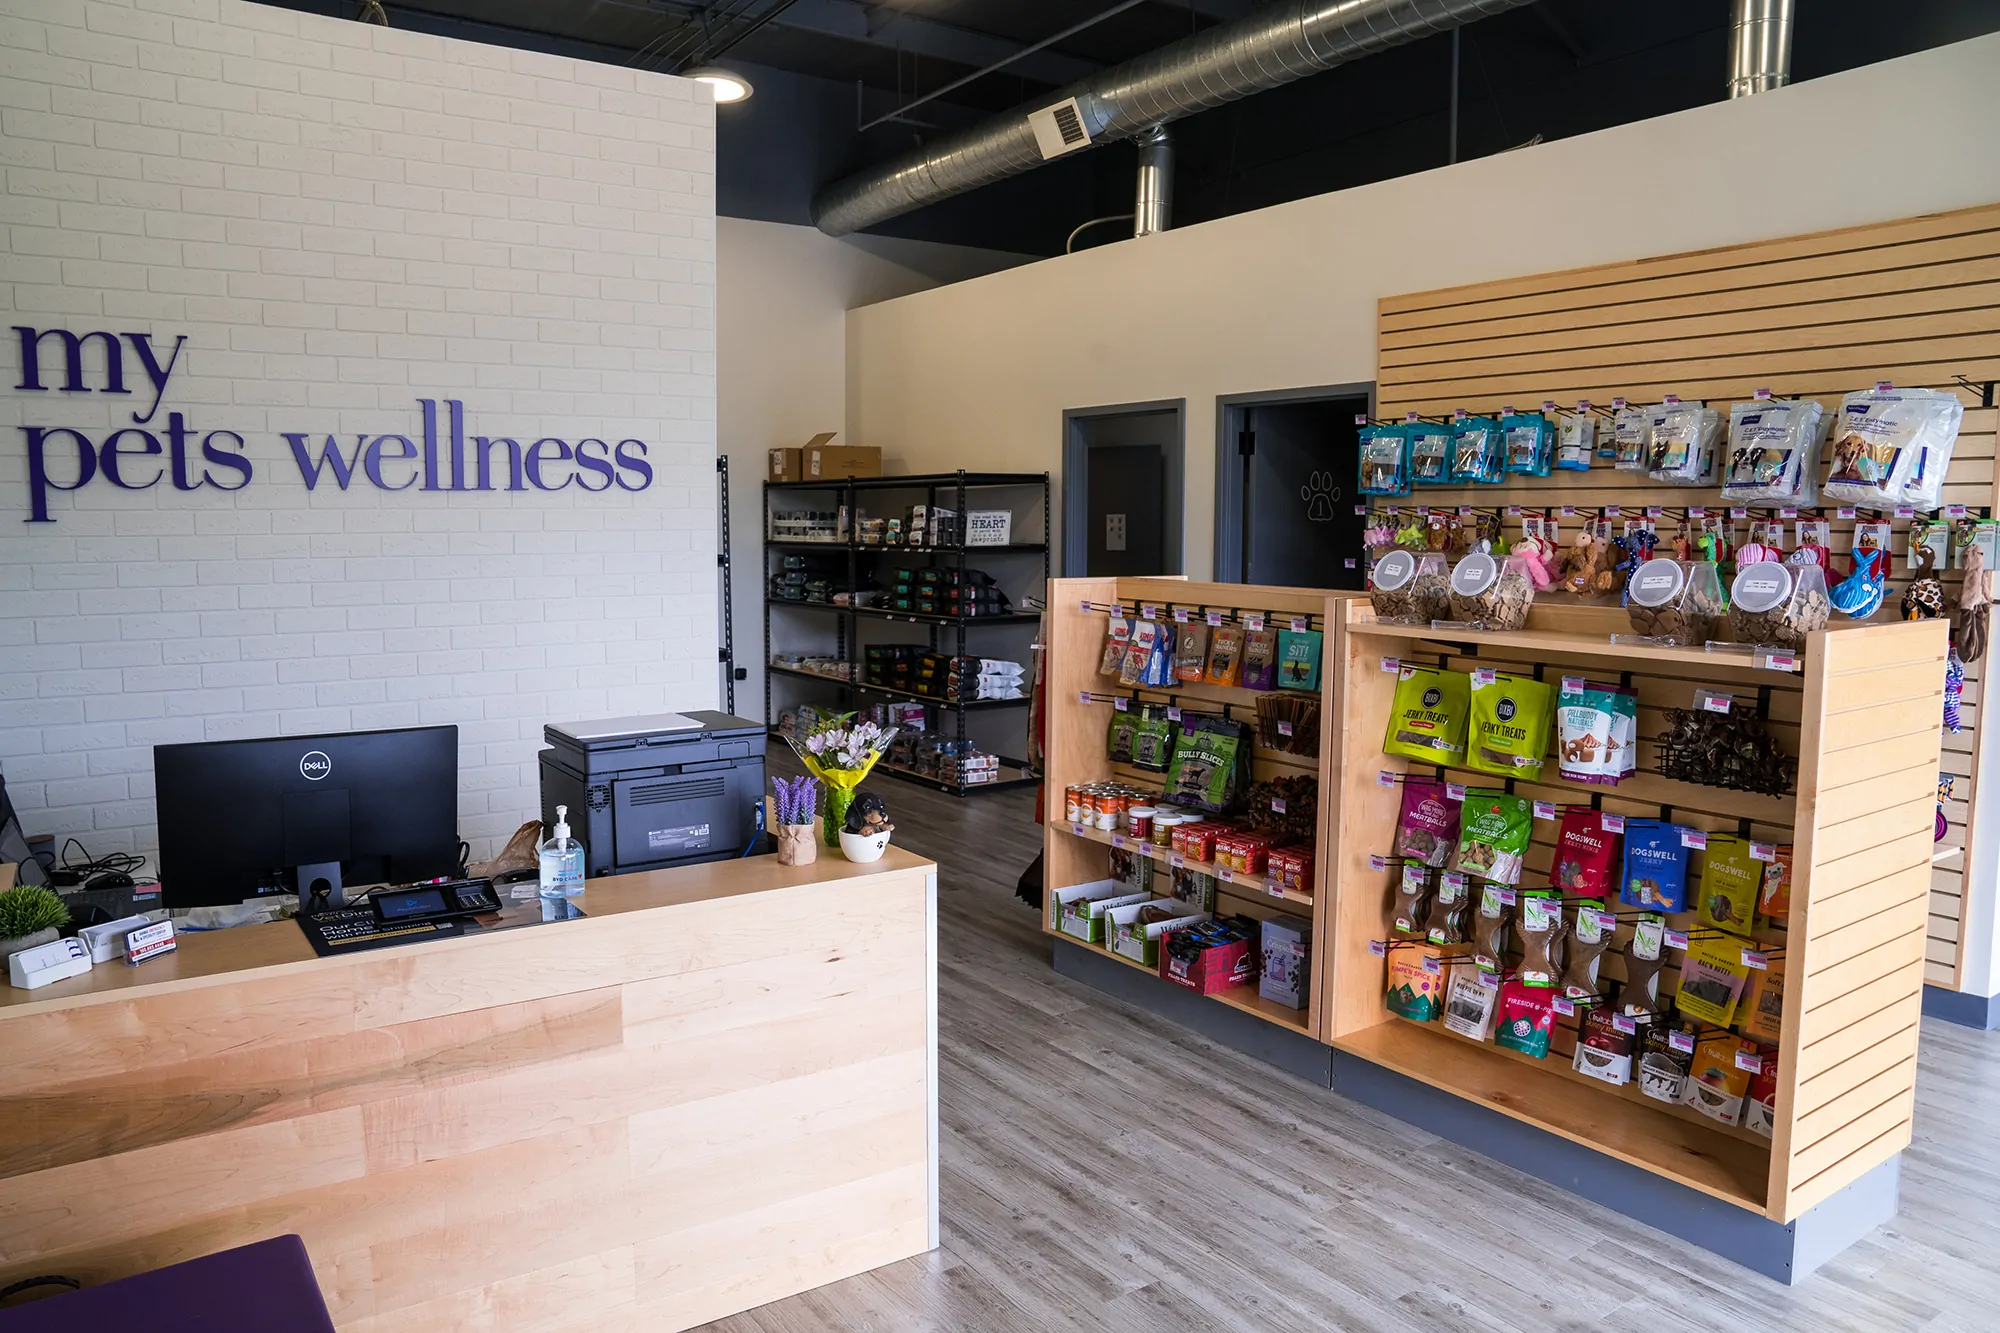 my pets wellness lobby with reception and retail